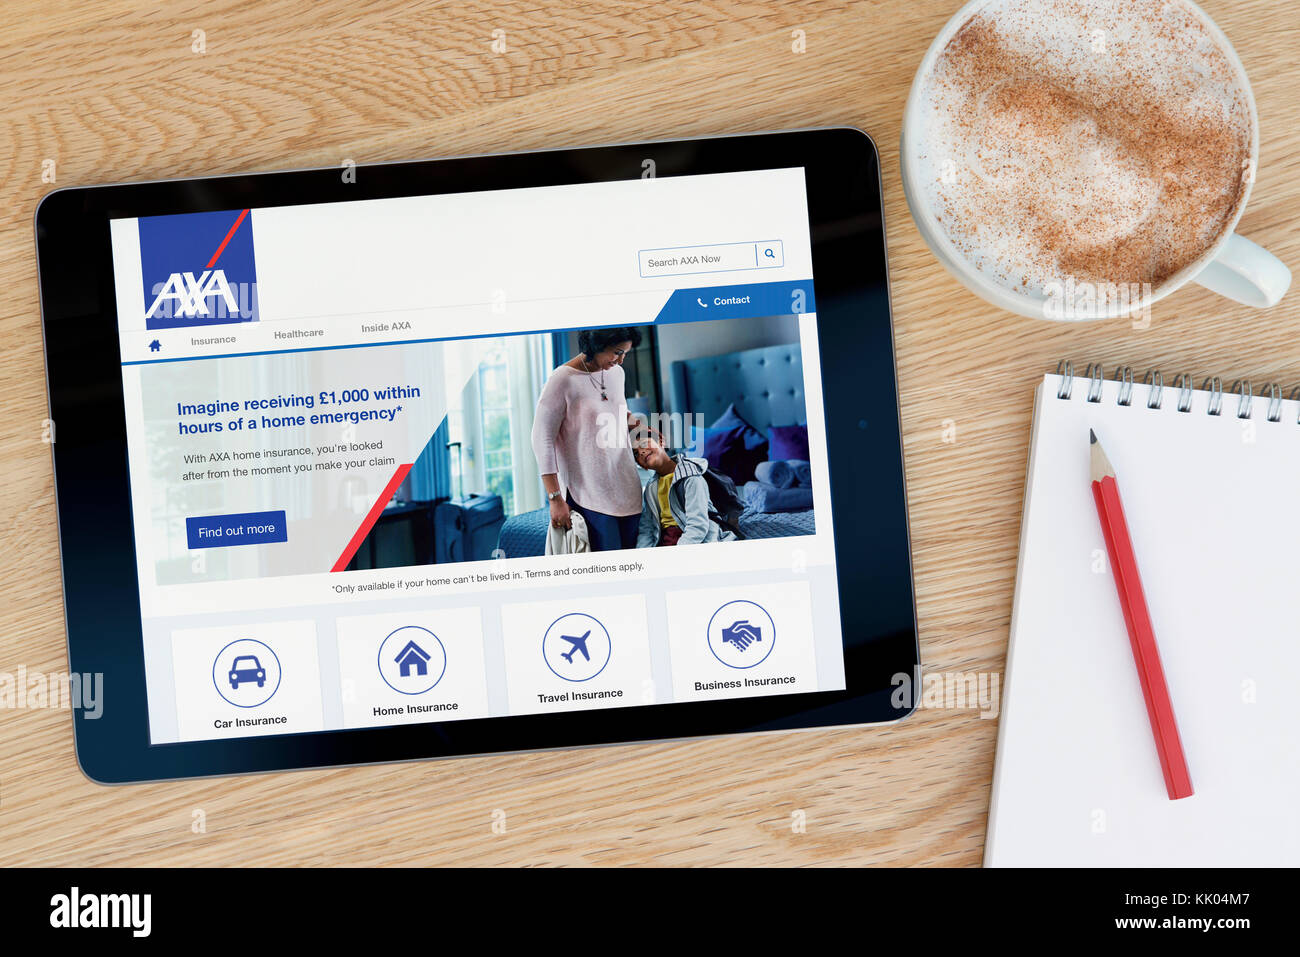 A man looks at the AXA website on his iPad tablet device, shot against a wooden table top background (Editorial use only) Stock Photo